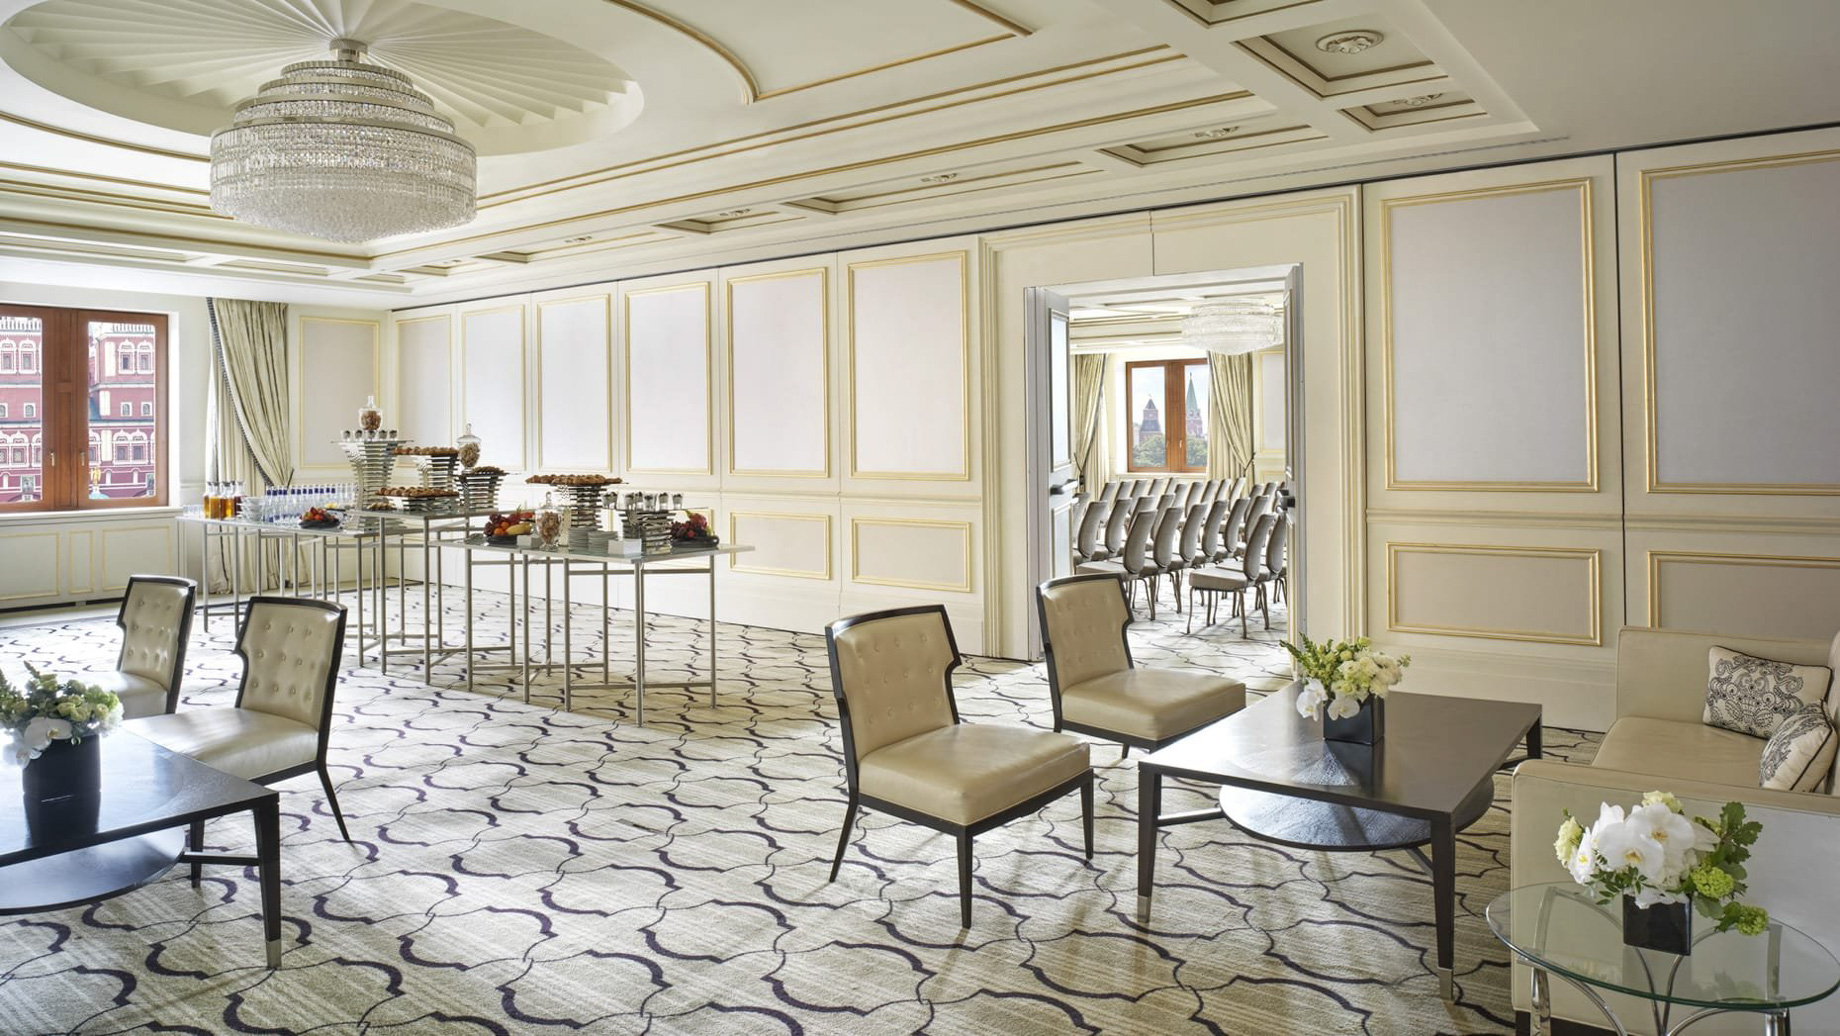 Four Seasons Hotel Moscow - Moscow, Russia - Dolgoruky Banquet Room 1